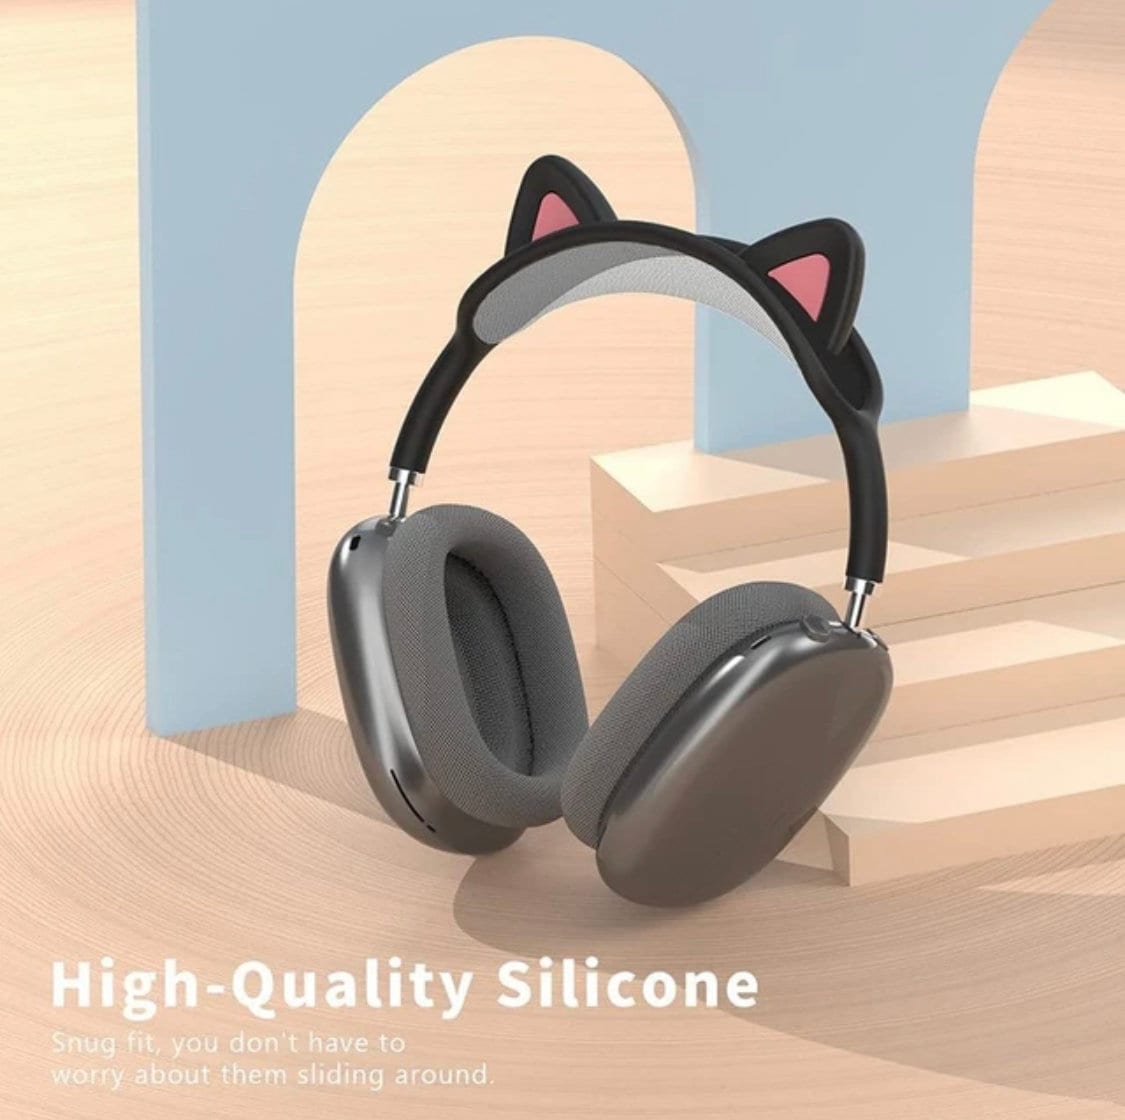 Custom Waterproof Silicone Bluetooth Headphones Flipkart Cushions For AirPods  Max High Protection Travel Case From Headsetfactory, $69.95